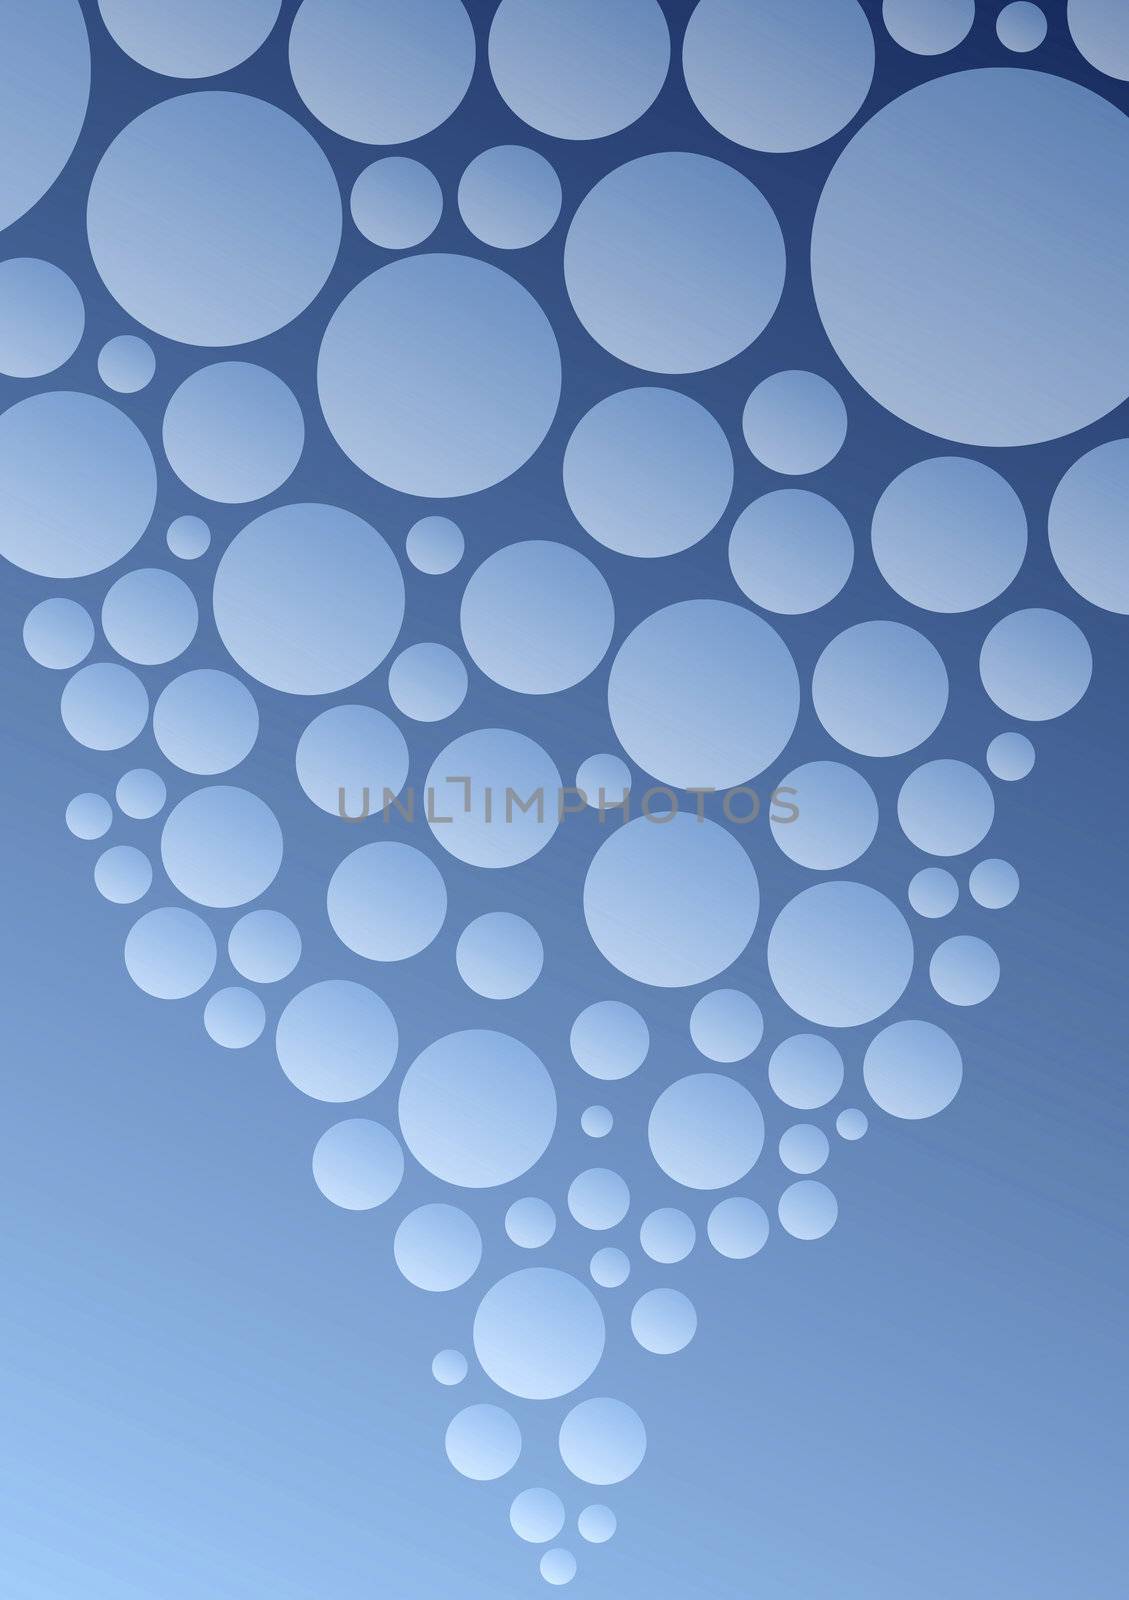 Abstract blue bubbles background - 2d illustration